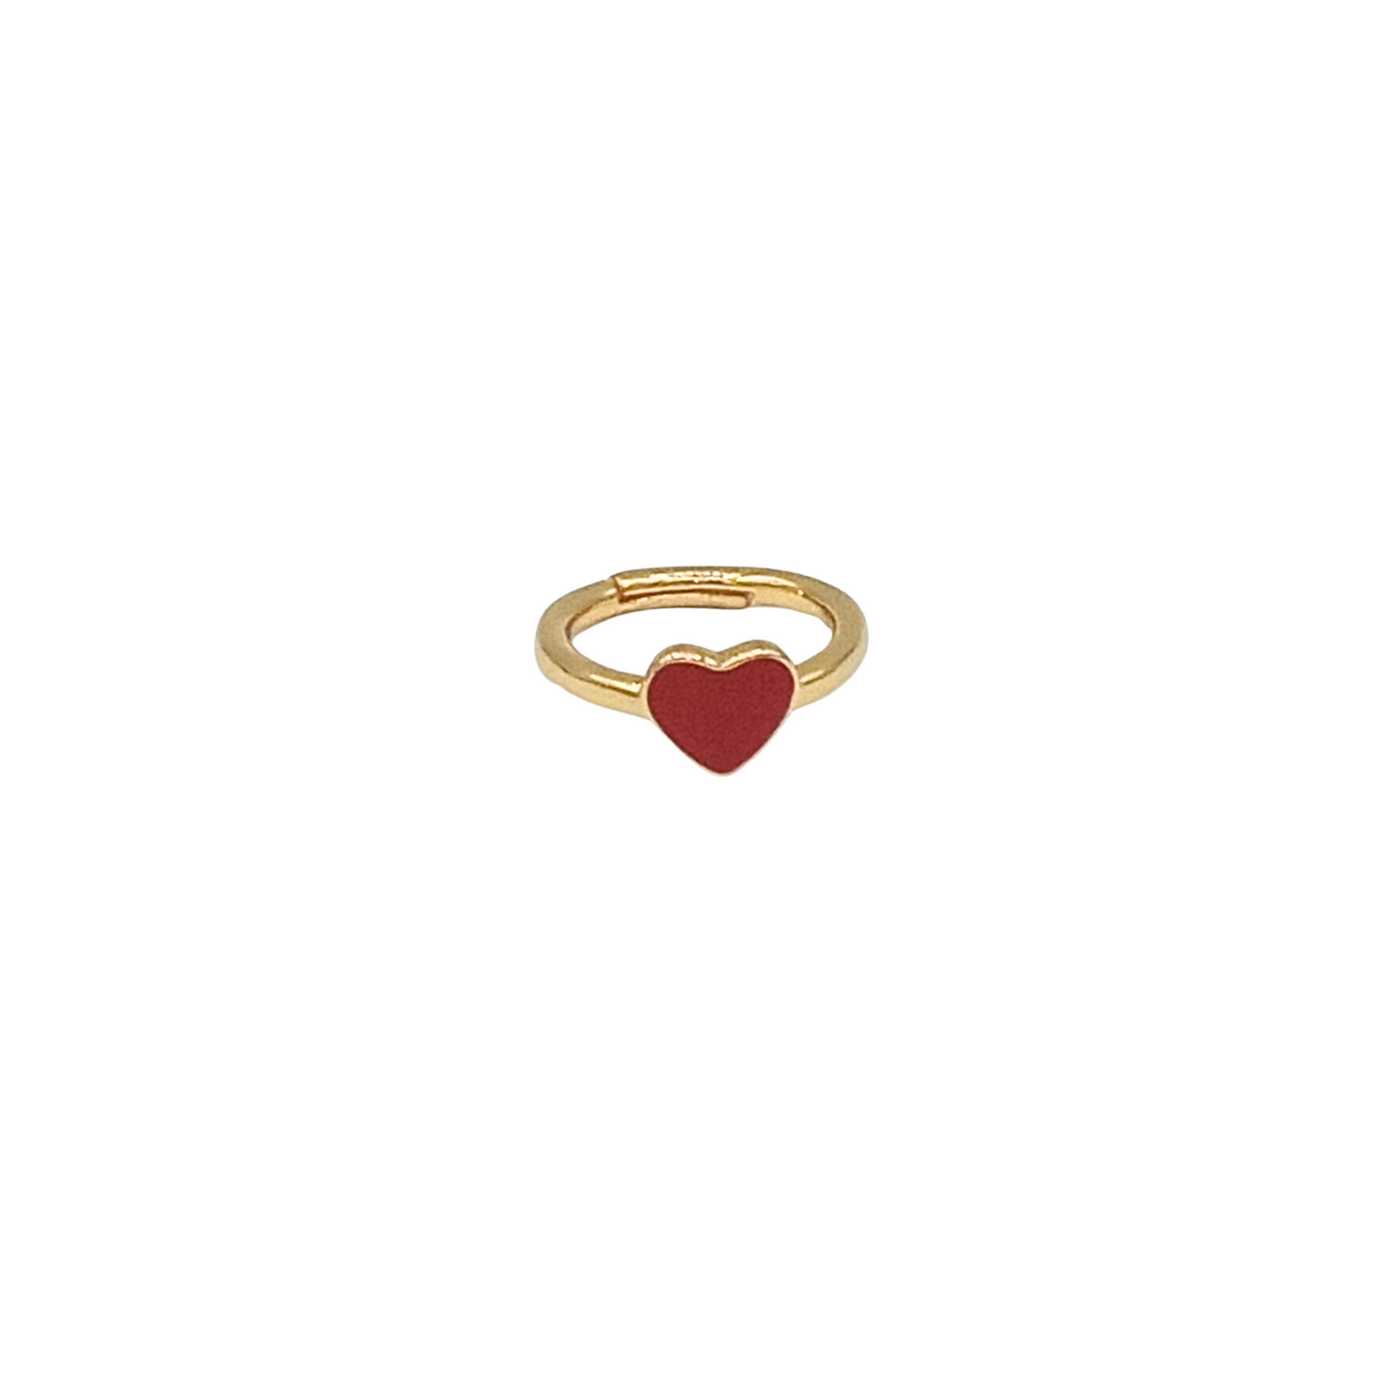 Dainty Red Heart Ring, Crystal Heart Ring, Gold Heart Ring, Gold Crystal  Heart | eBay